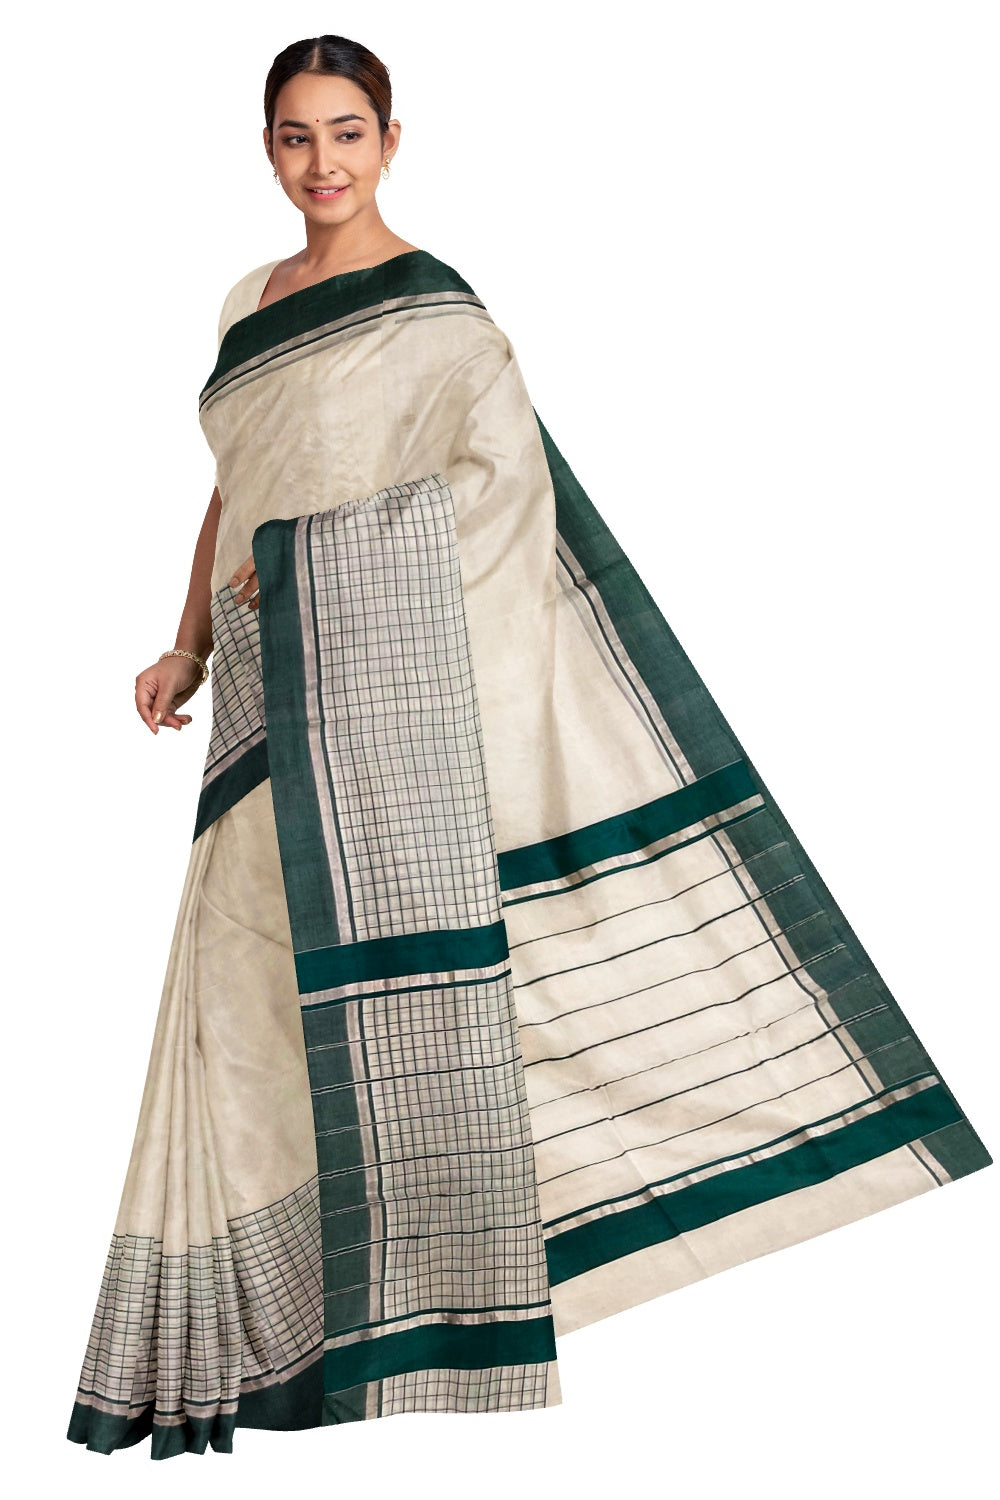 Southloom Premium Handloom Silver Kasavu Saree with and Green Check Design and Lines on Pallu